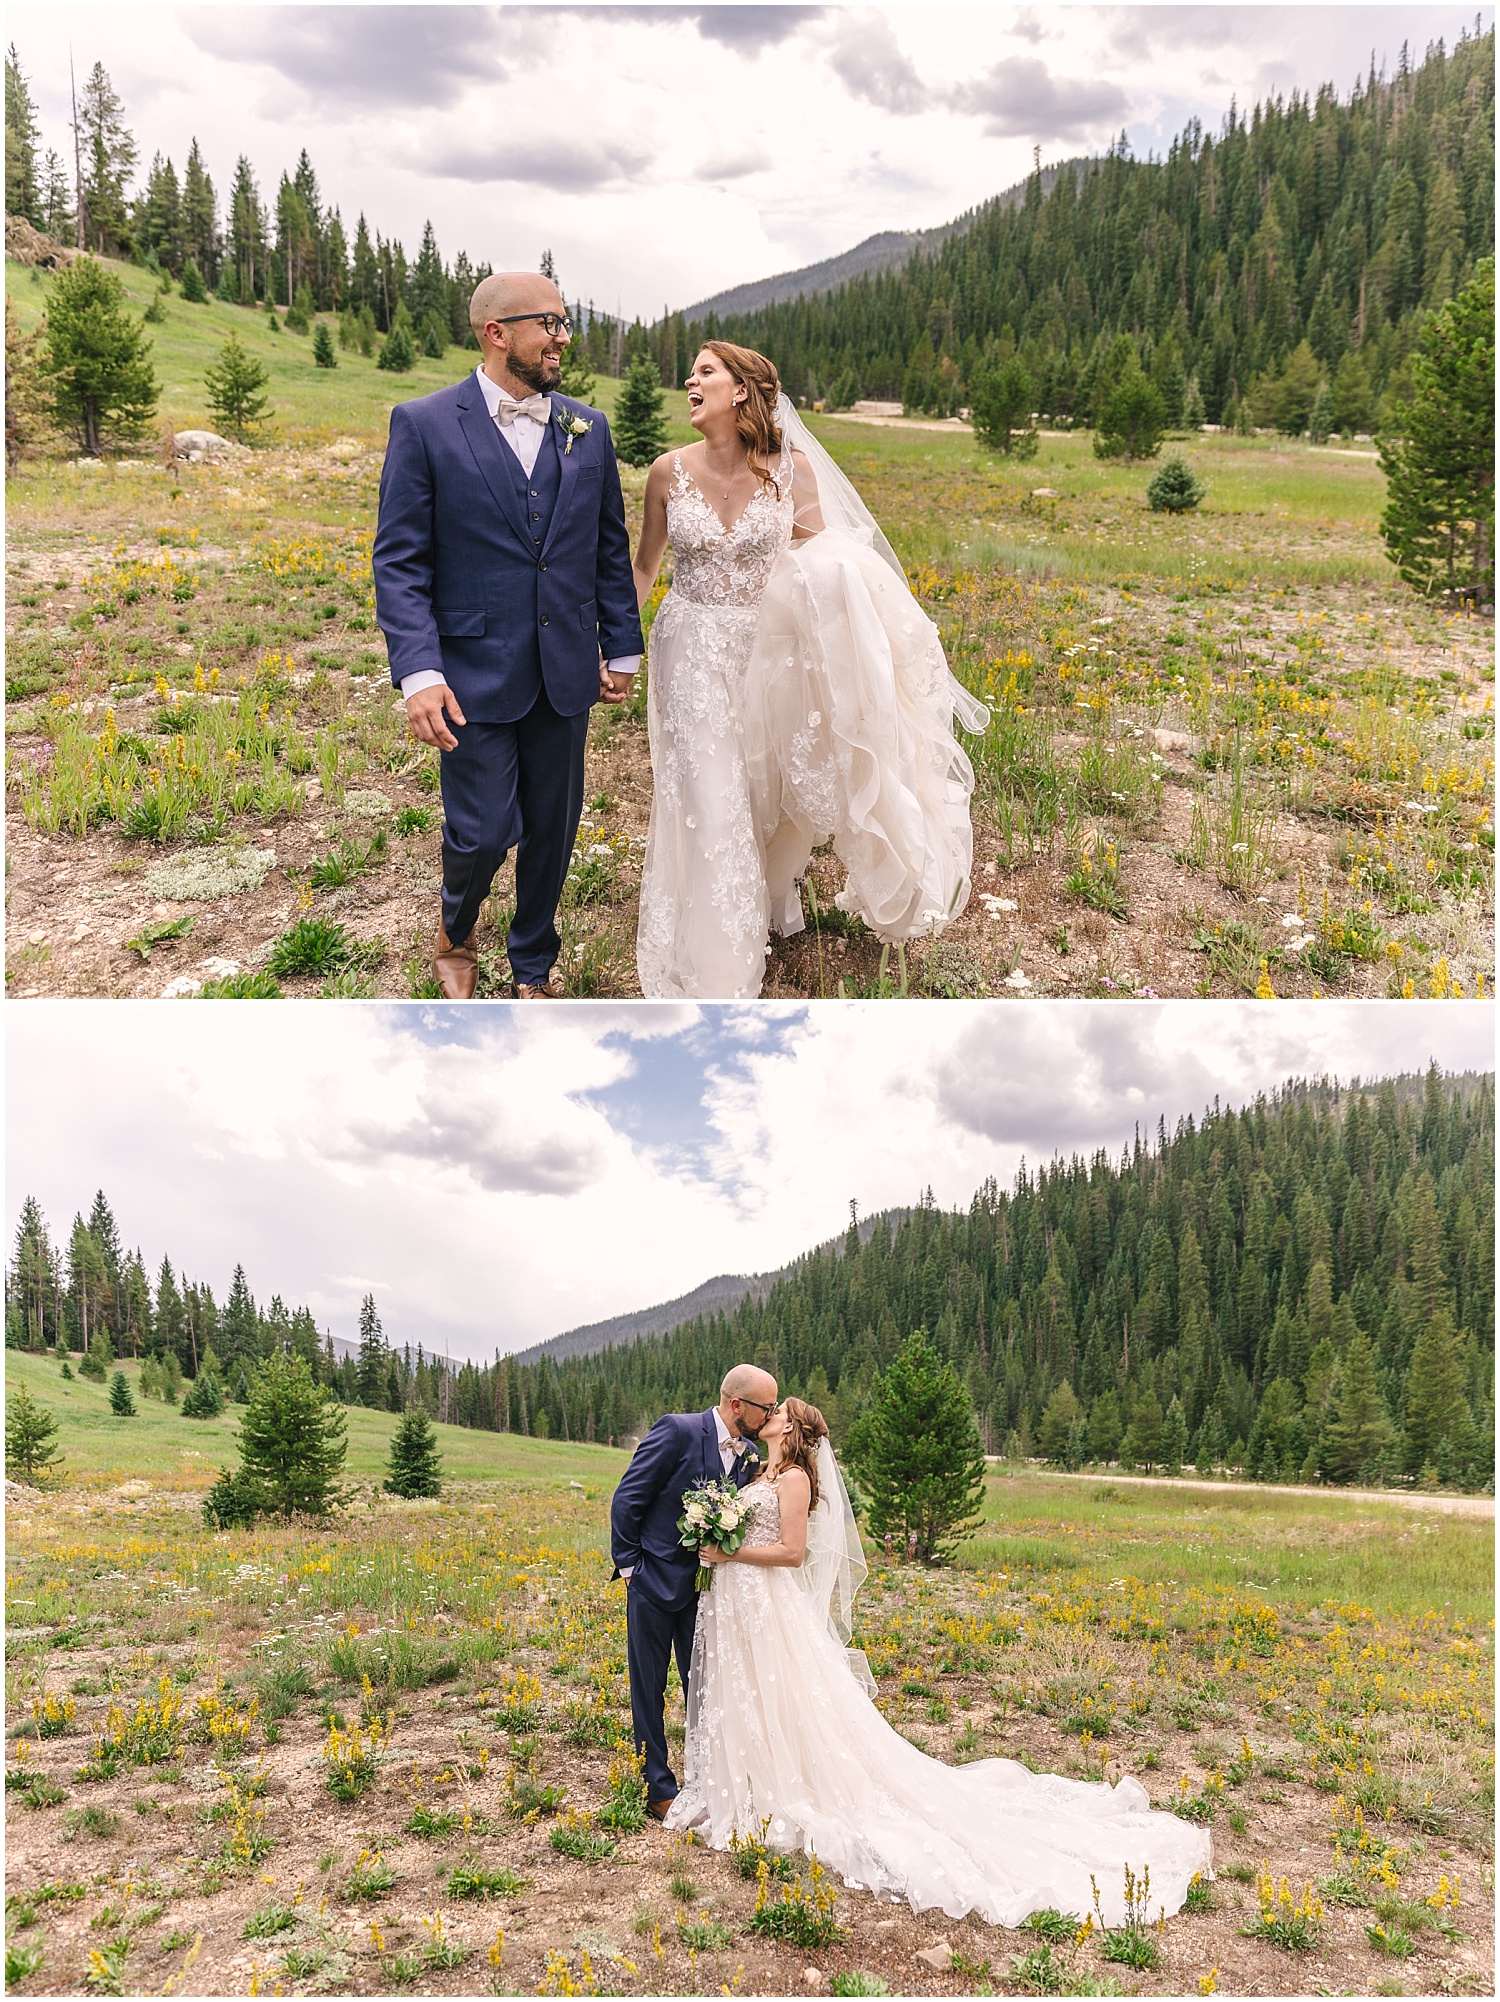 Bride and groom walking through a field in the mountains outside Winter Park Colorado